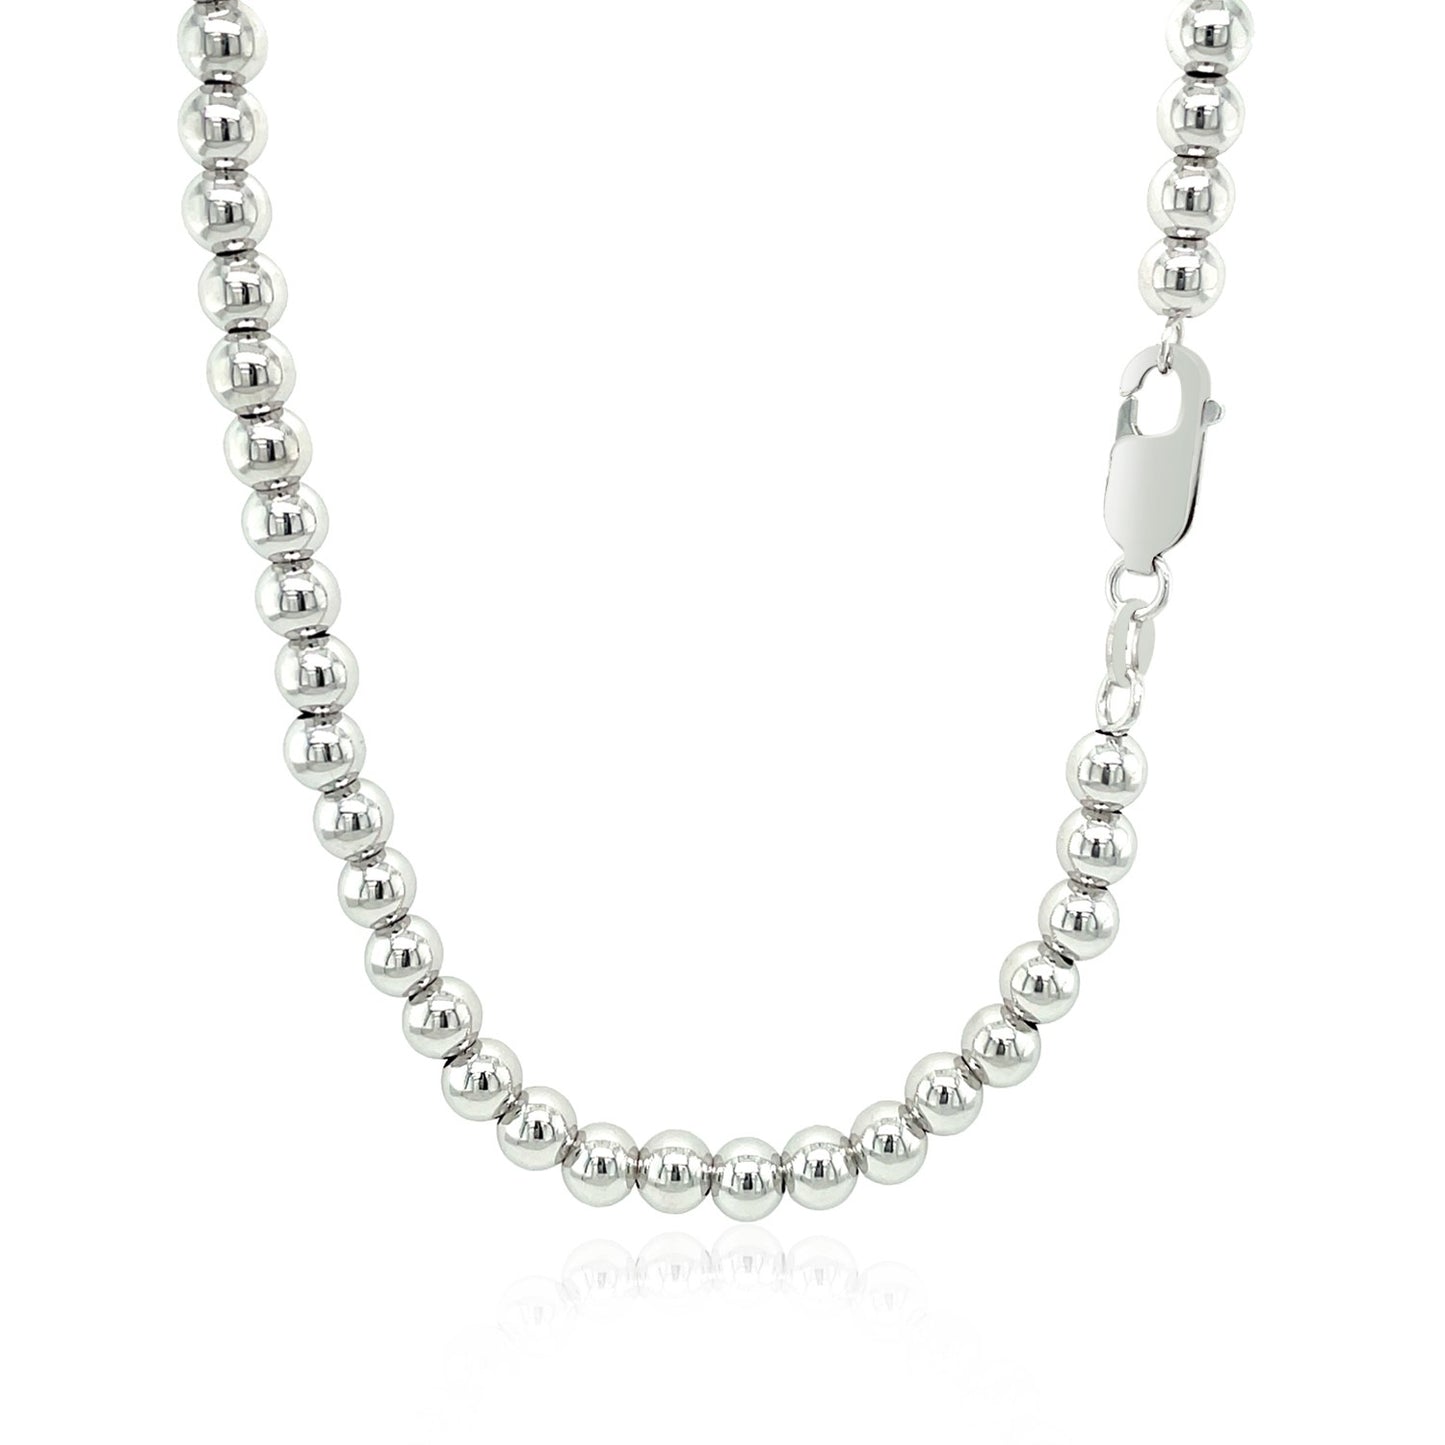 Sterling Silver Rhodium Plated Graduated Motif Polished Bead Necklace